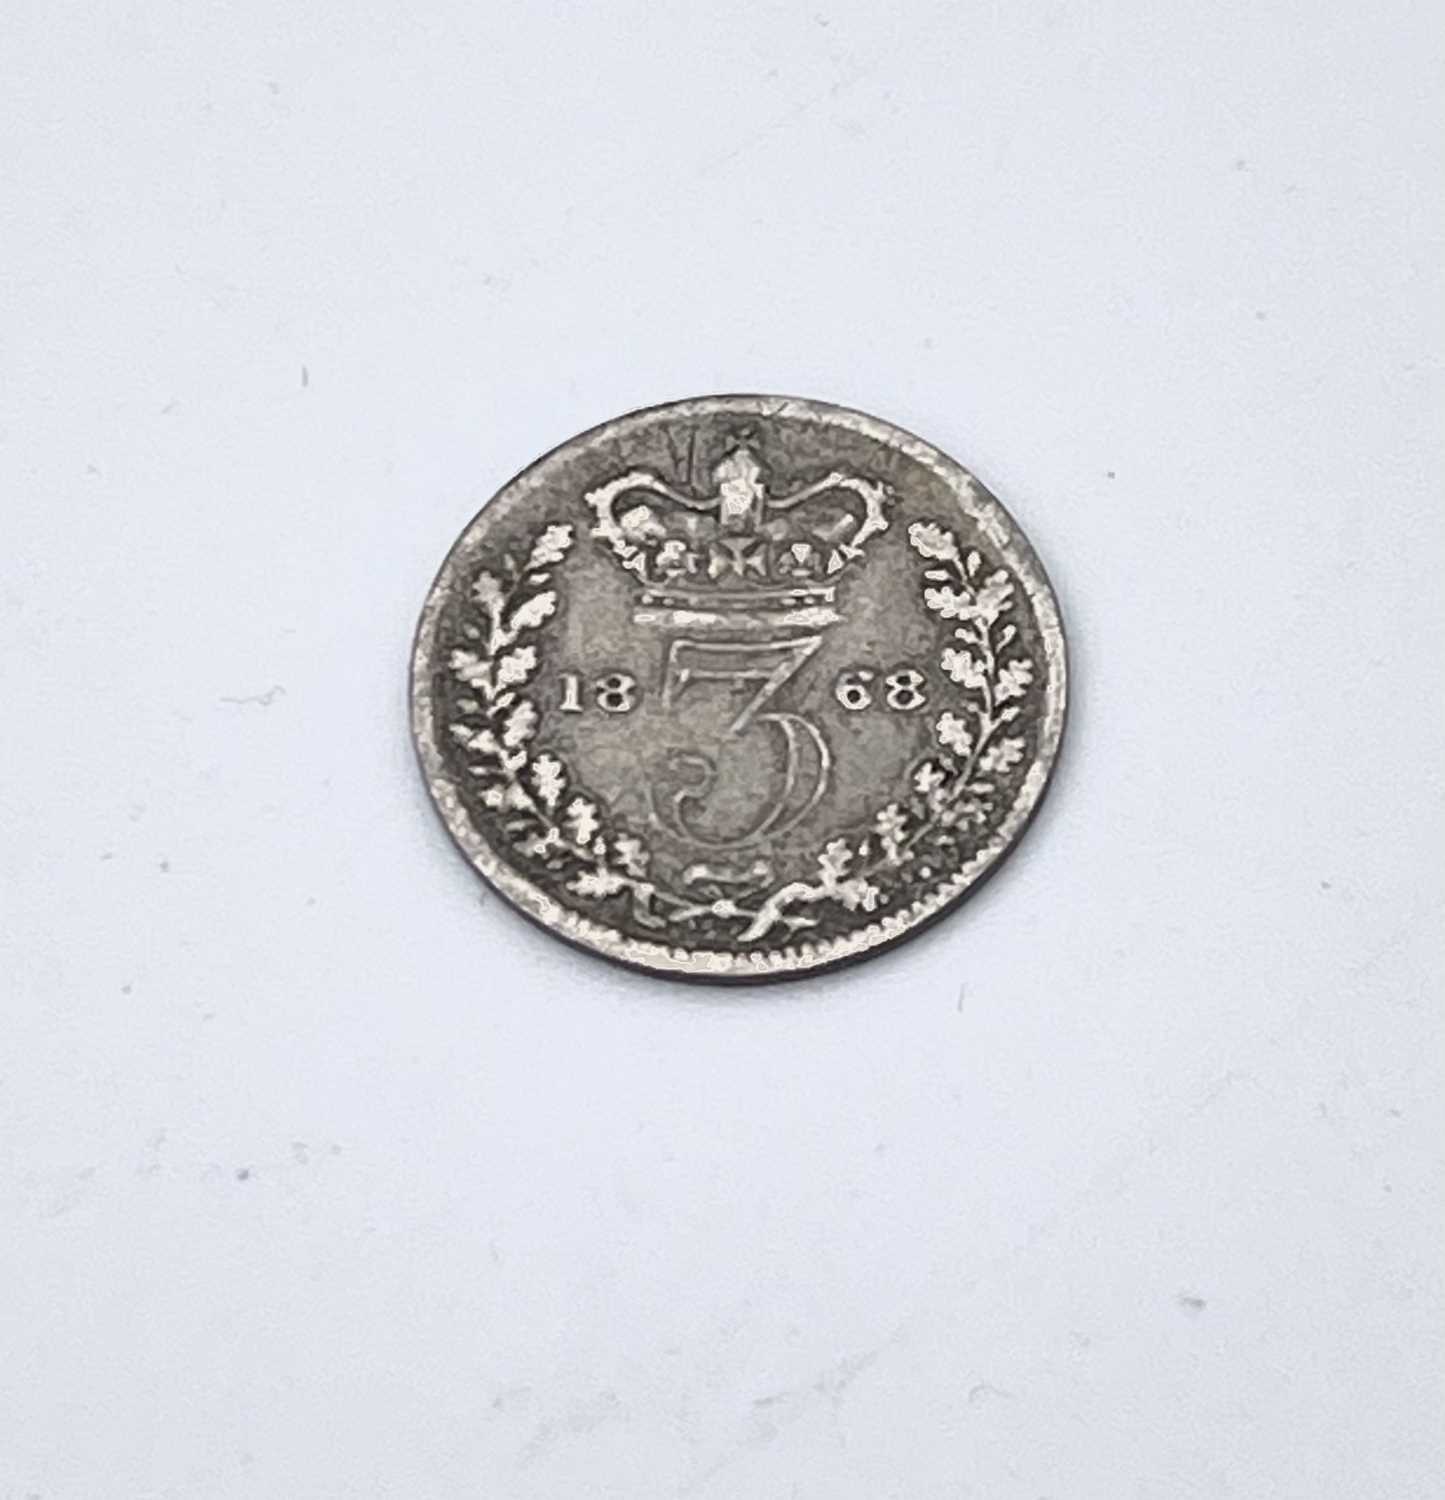 Silver Threepence 1868 Error Coin. The 1868 "RRITANNIAR" error coin - catalogued in current coin - Image 3 of 4